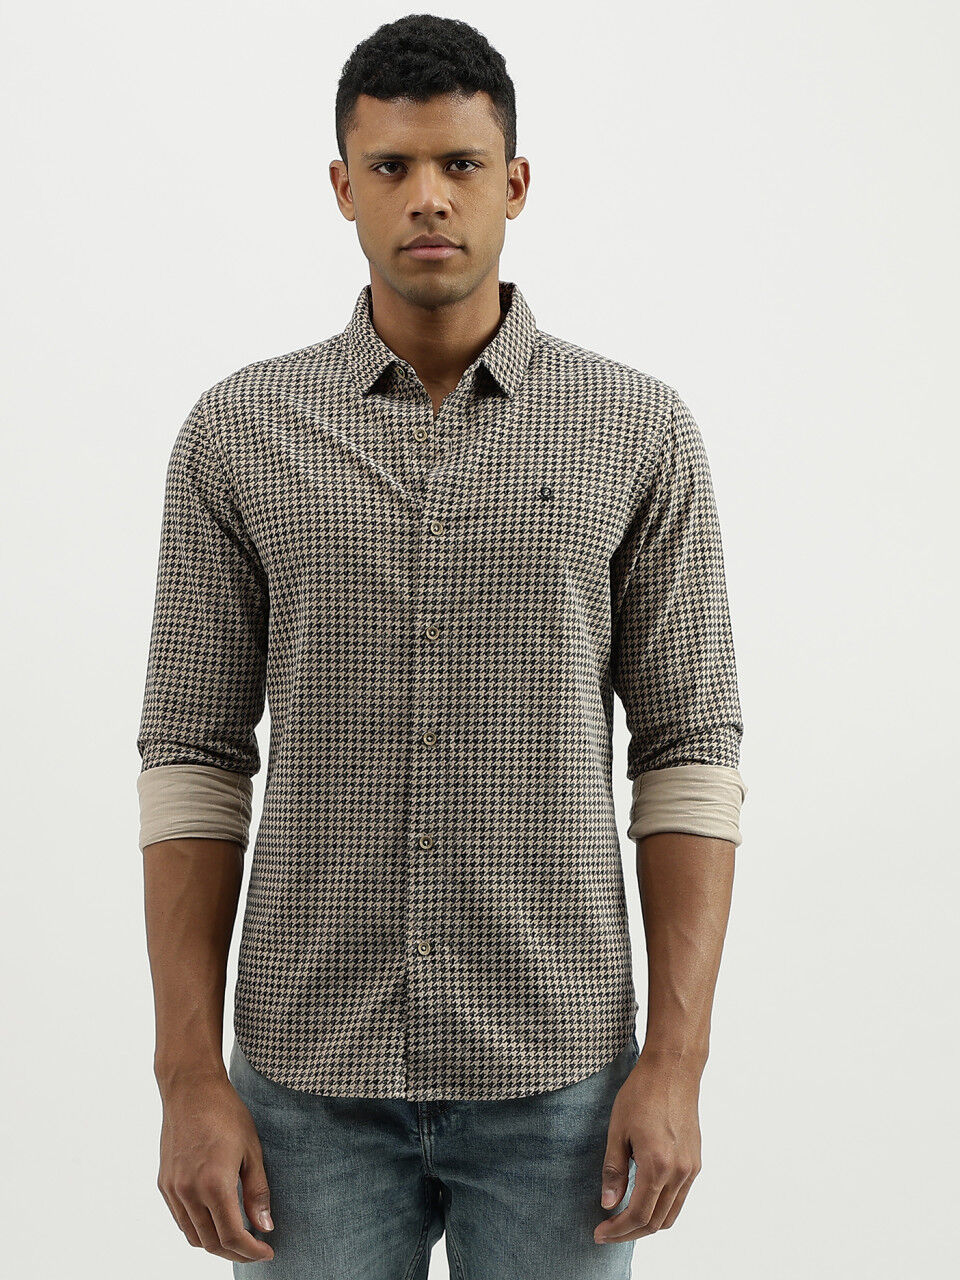 Men's Shirts New Collection 2021 | Benetton